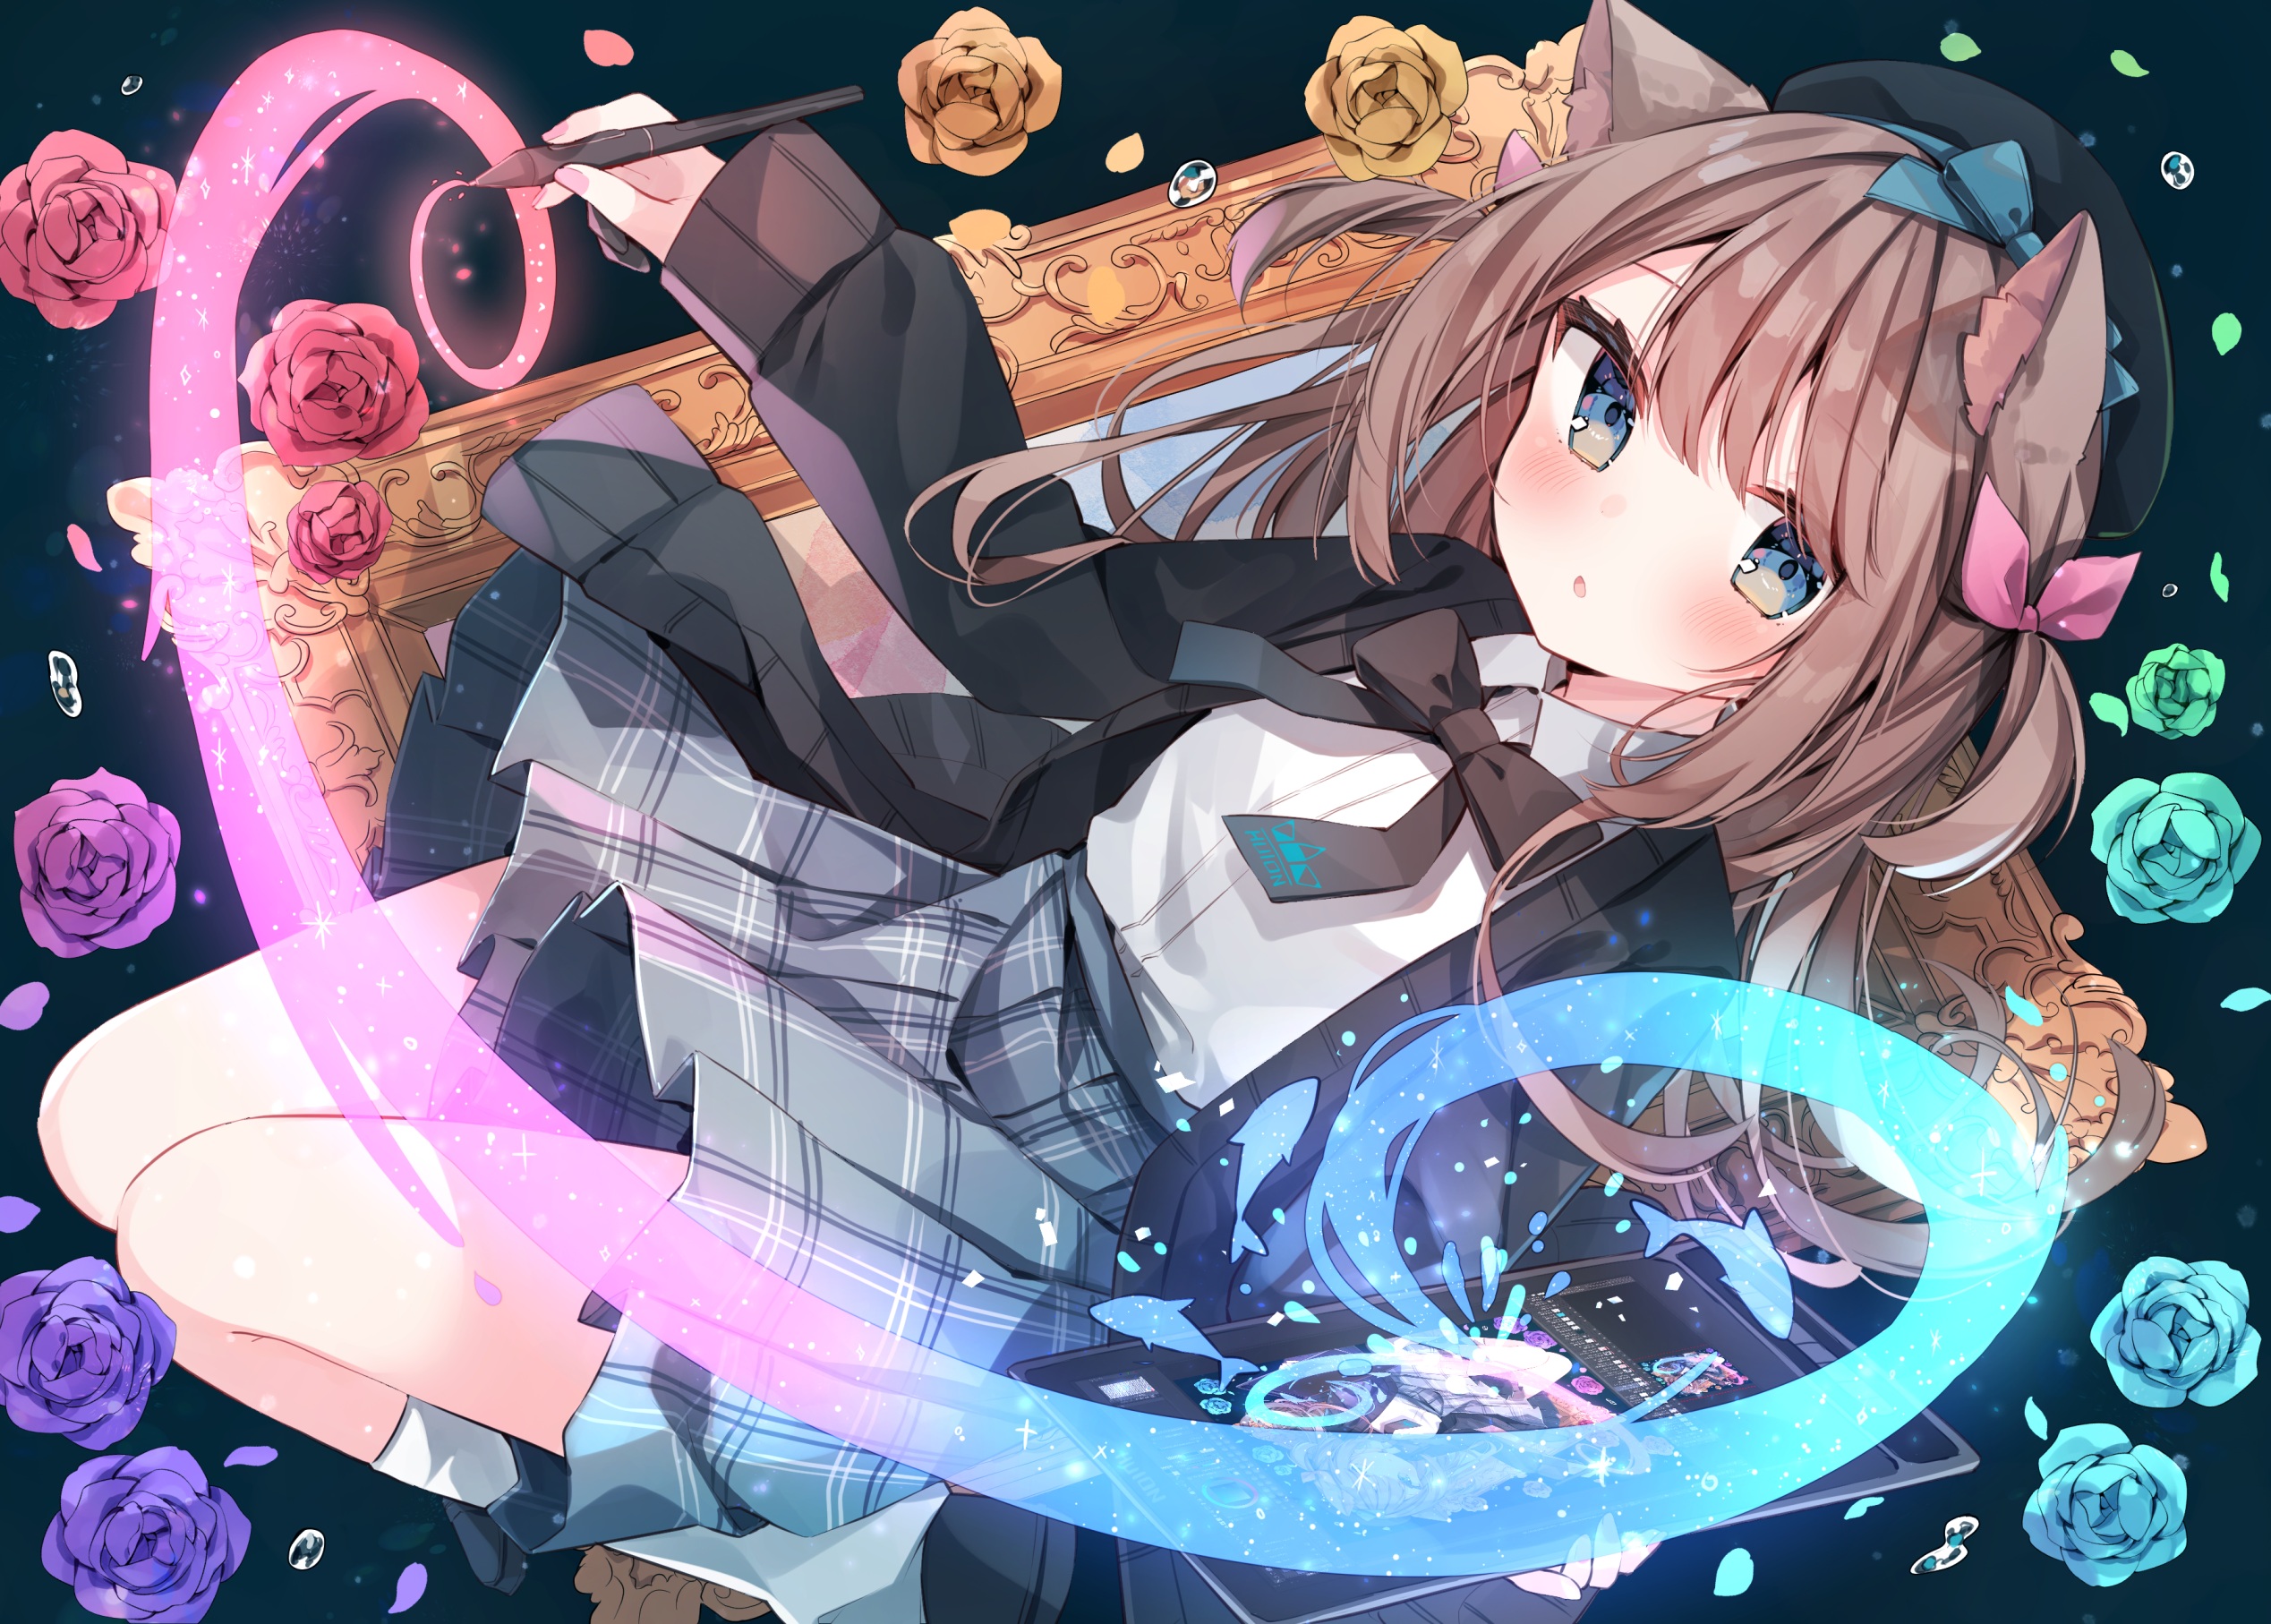 Anime 2537x1814 anime anime girls brunette blue eyes cat girl cat ears flowers picture frames looking at viewer bow tie schoolgirl school uniform long hair hat hair bows water drops blushing skirt